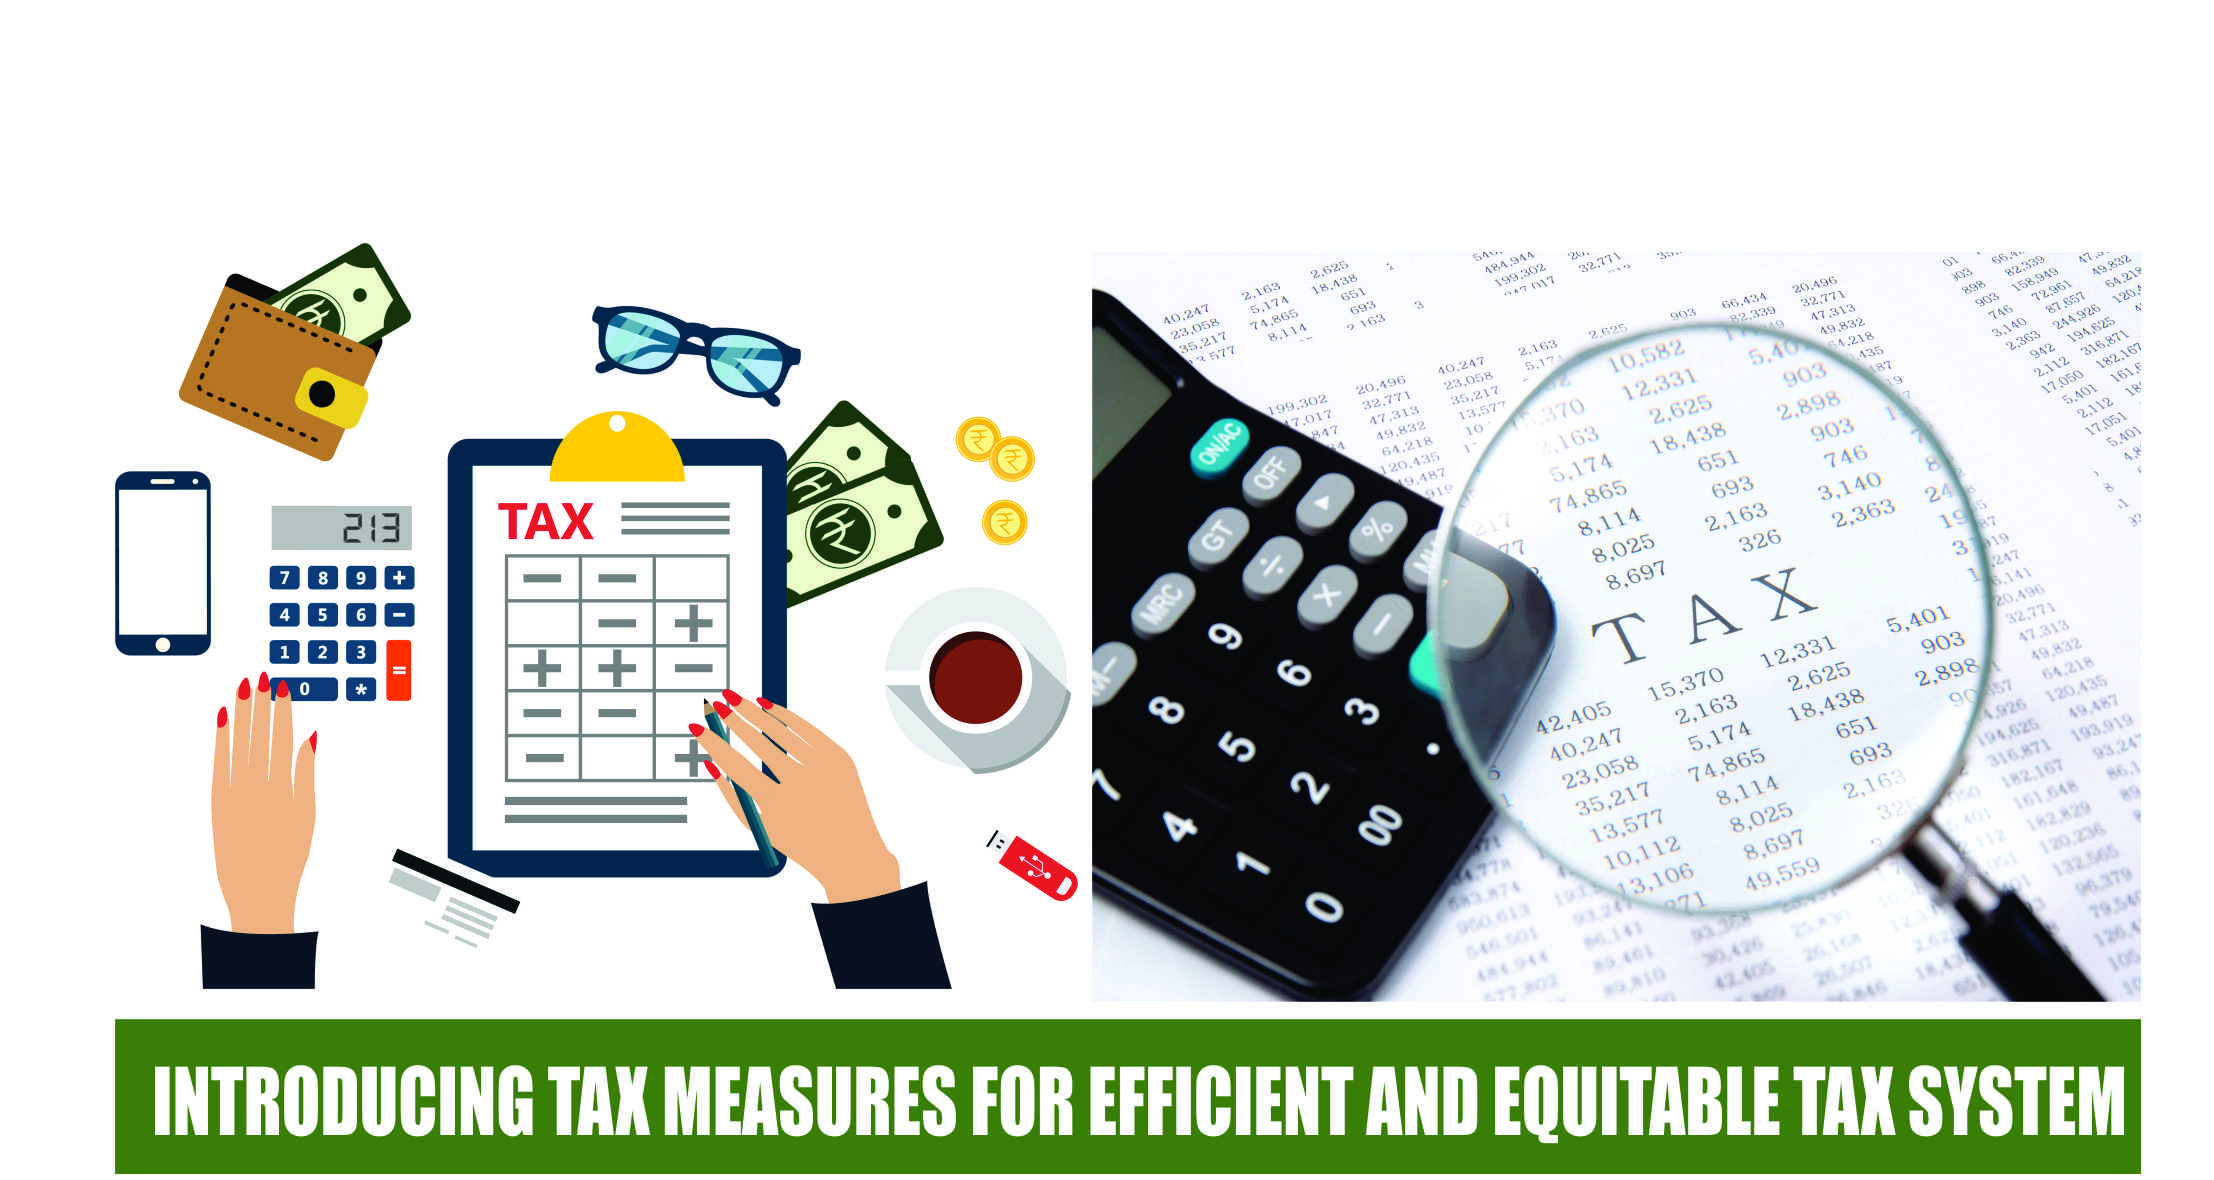 Introducing tax measures to make taxation system equitable and efficient logo